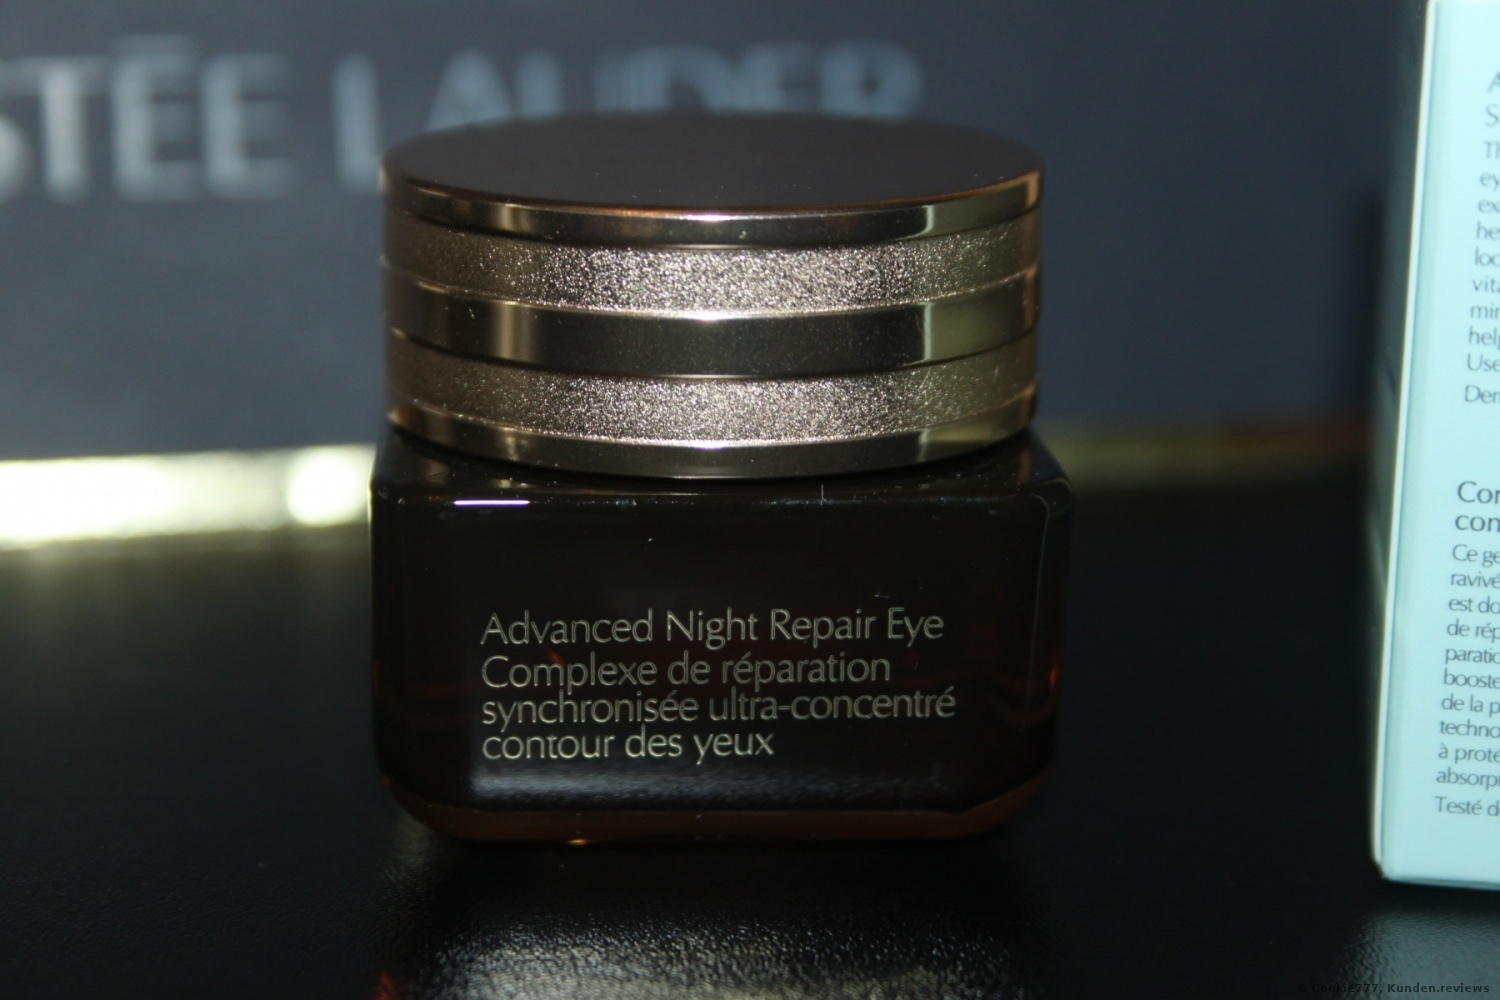 Estee Lauder Advanced Night Repair Eye Supercharged Complex Synchronized Recovery Augencreme Foto